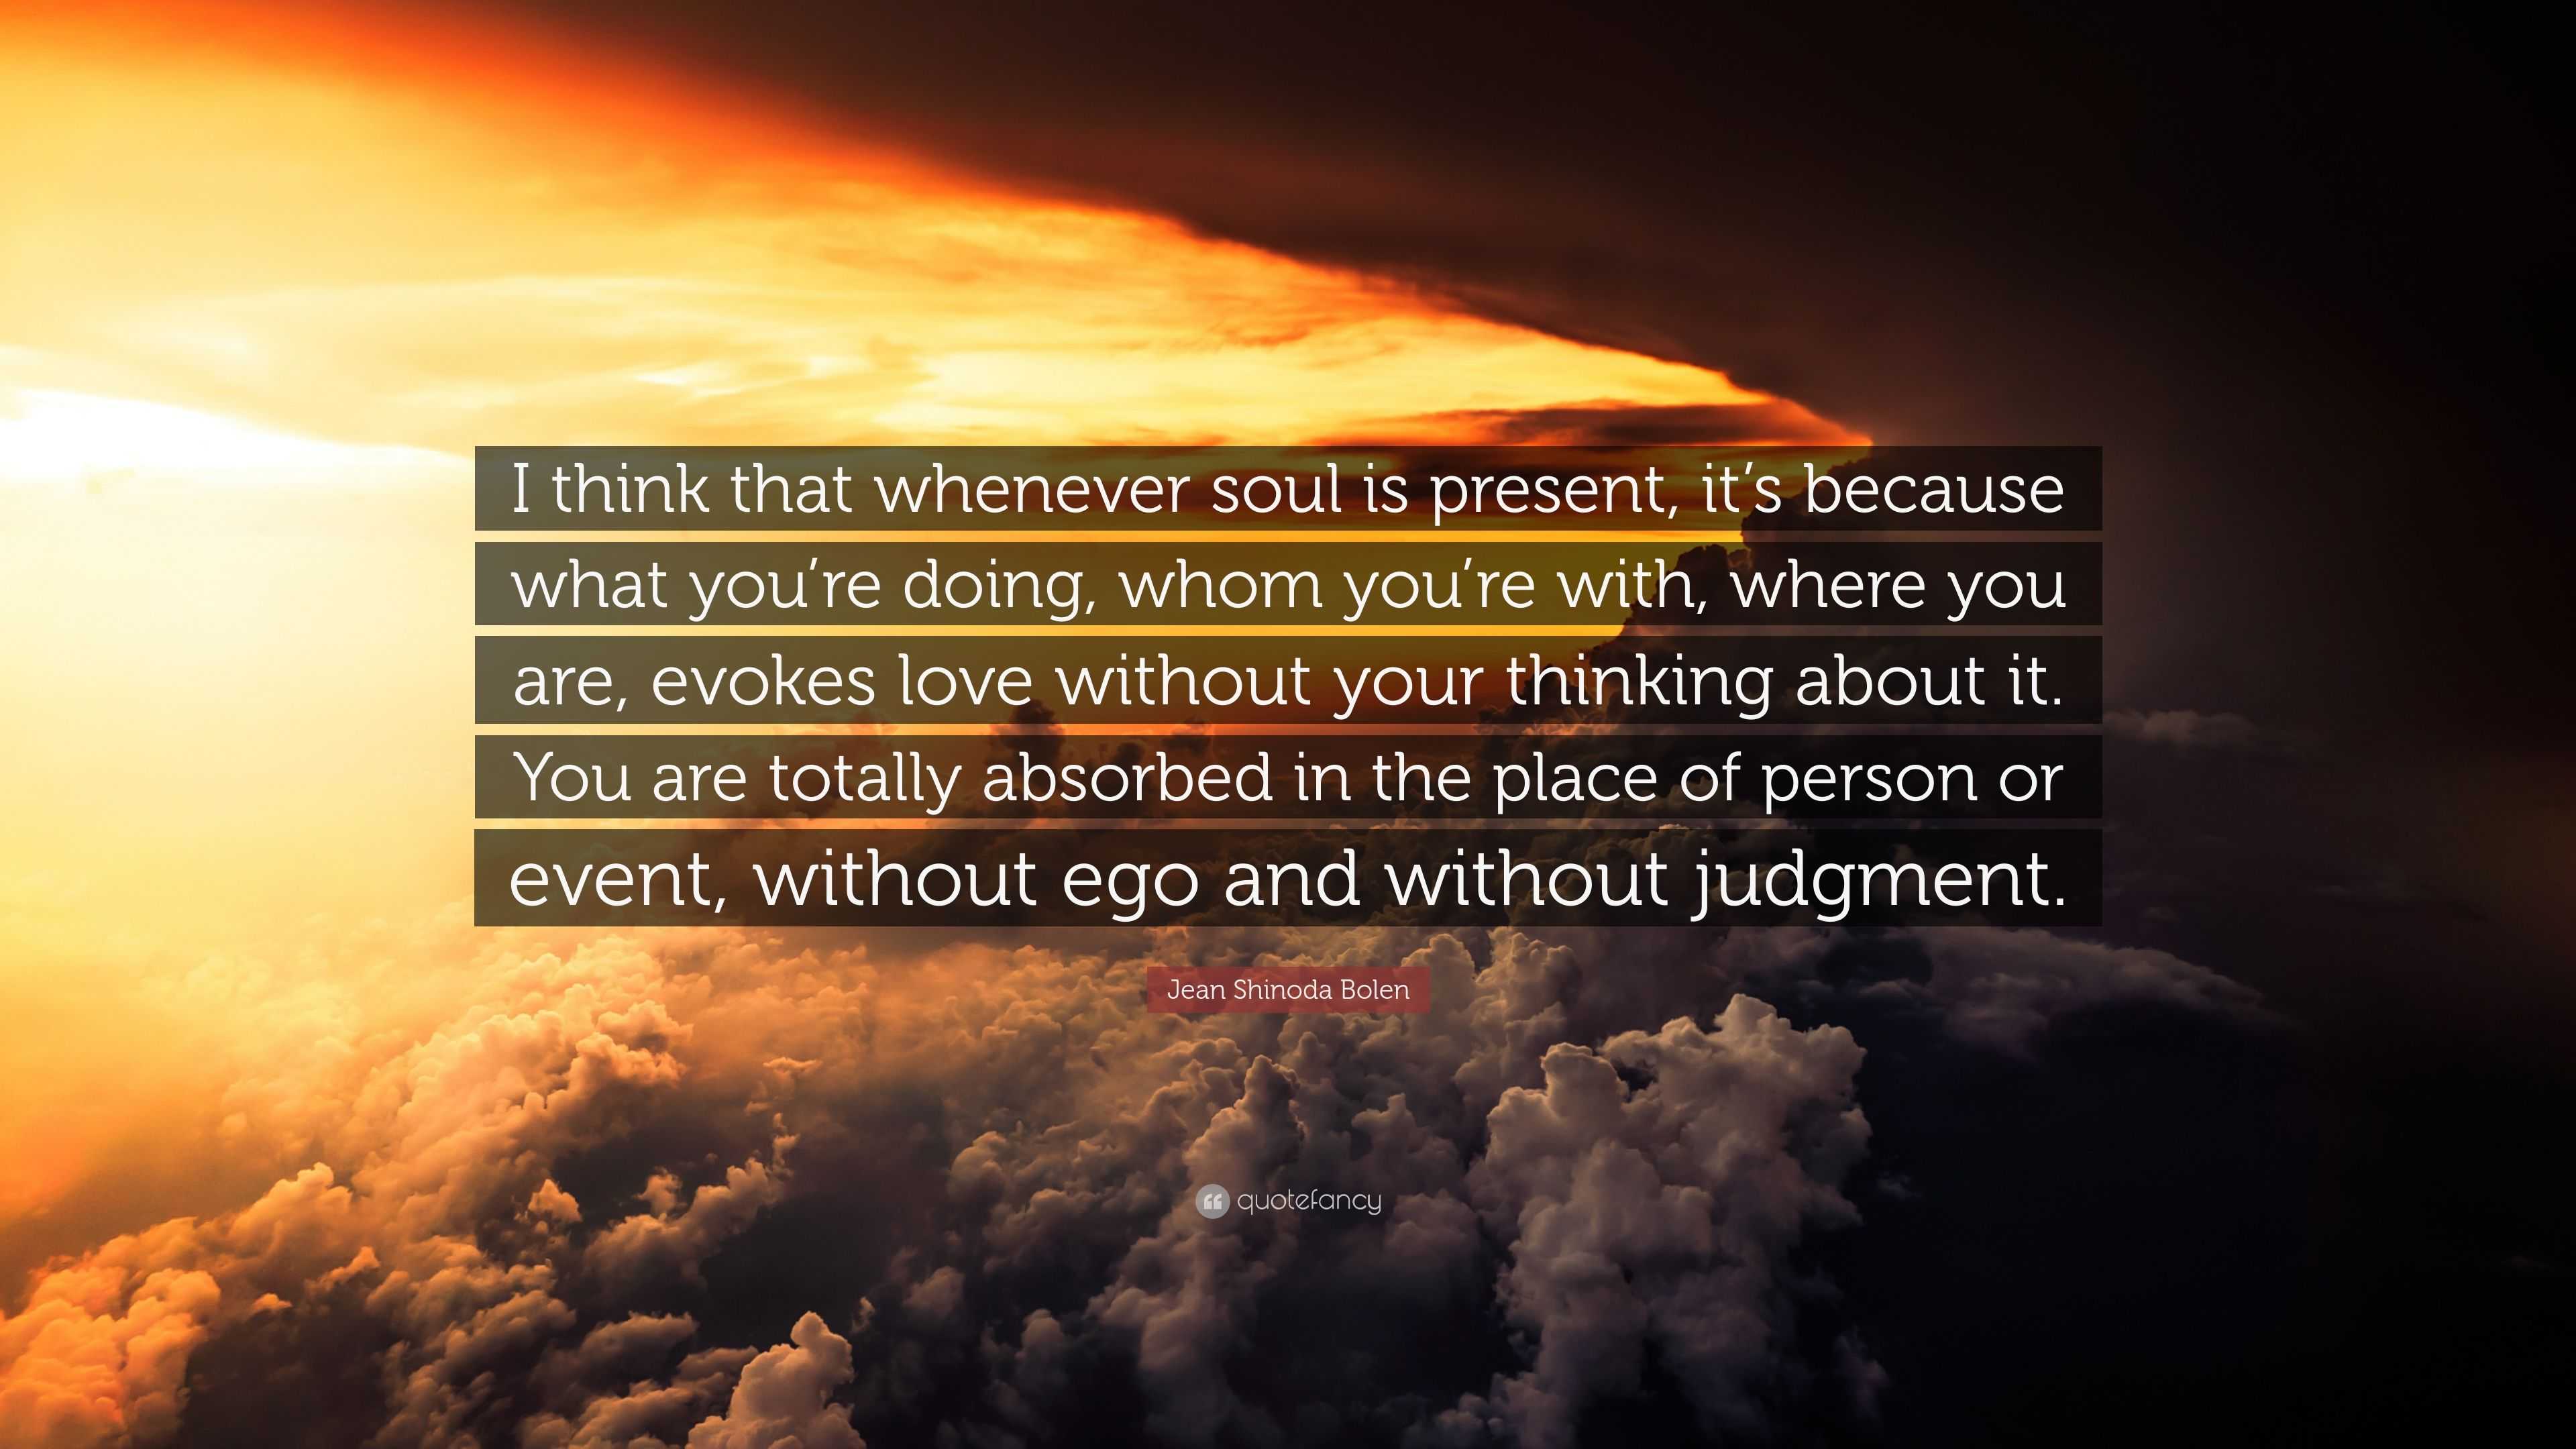 Jean Shinoda Bolen Quote: “I think that whenever soul is present, it’s ...